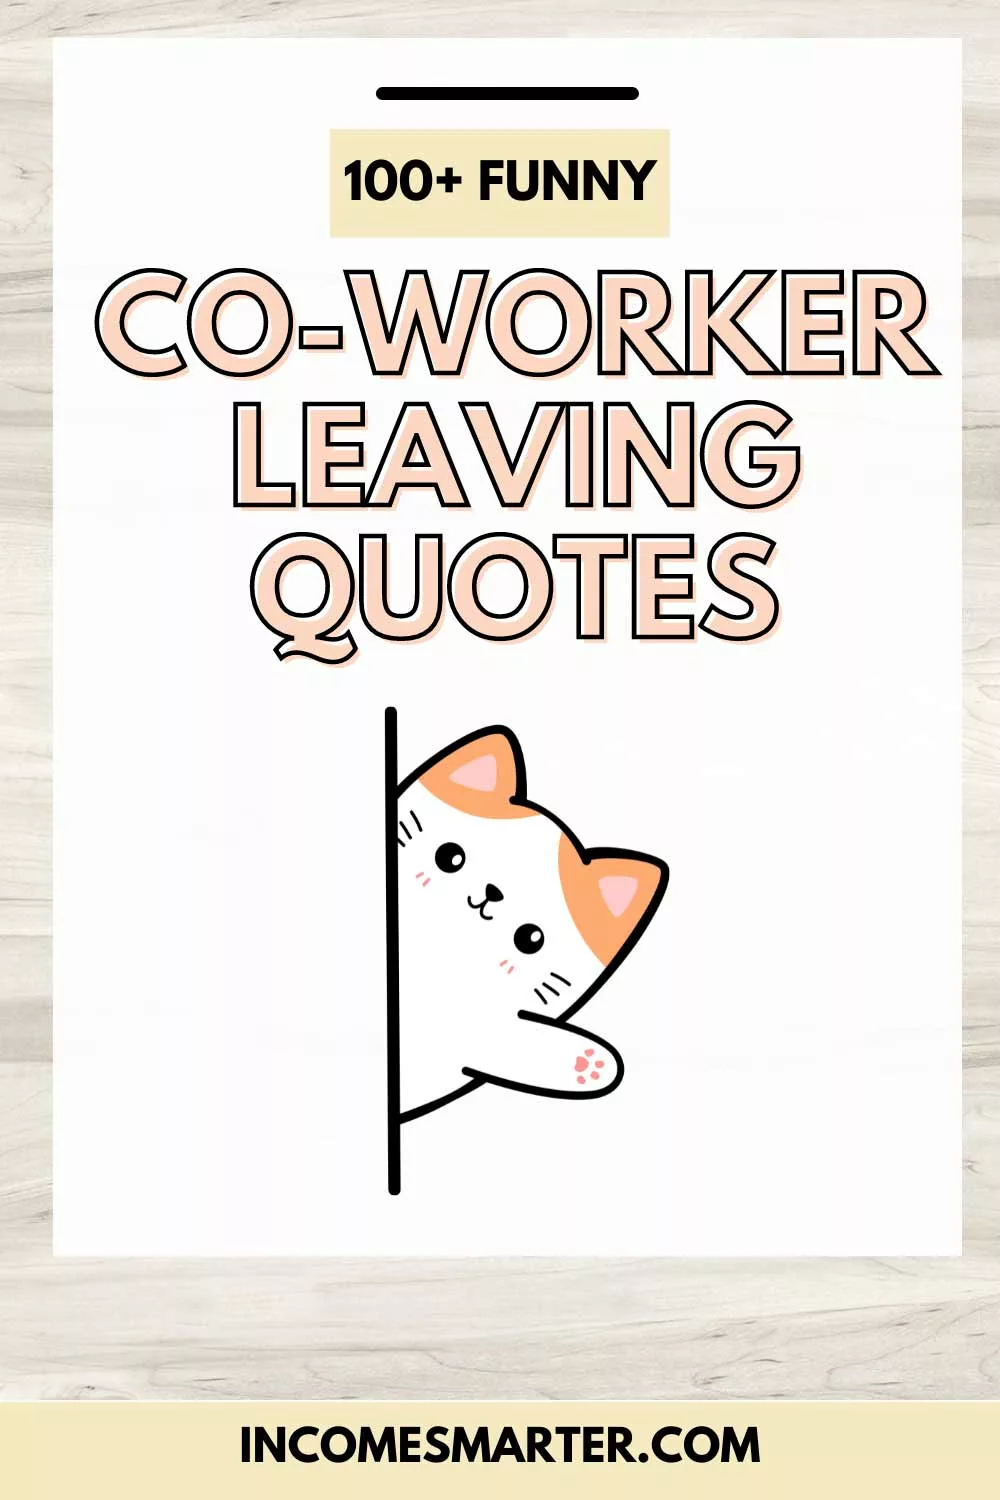 Co-worker leaving quotes funny